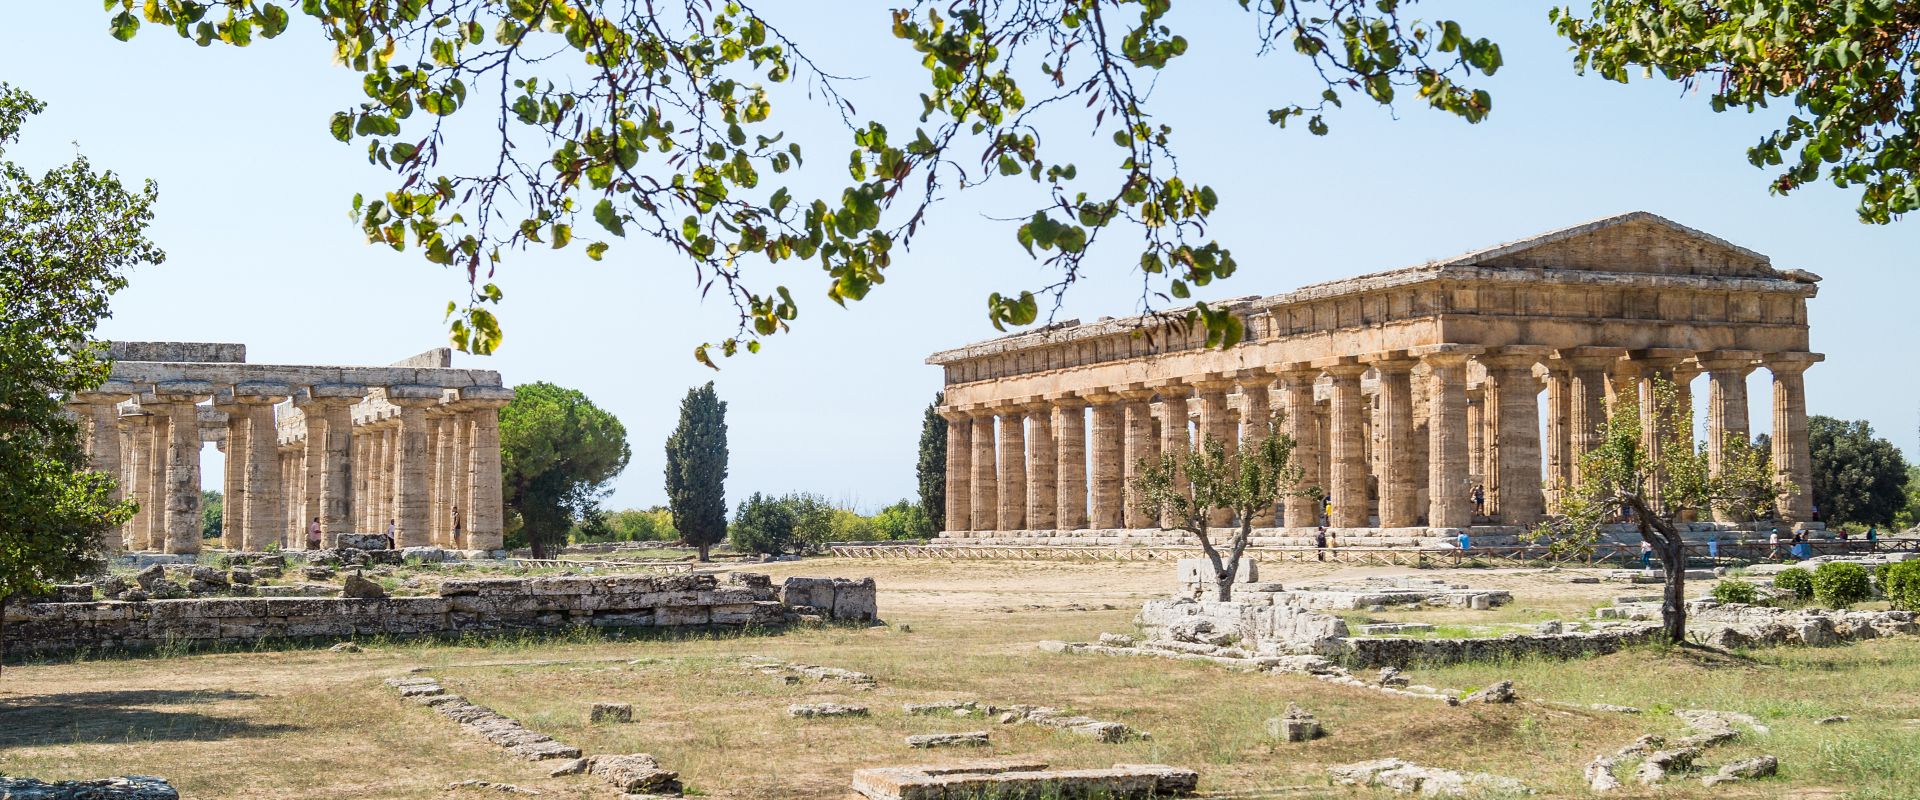 Classical greek temple at ruins of ancient city Paestum, Cilento, Italy